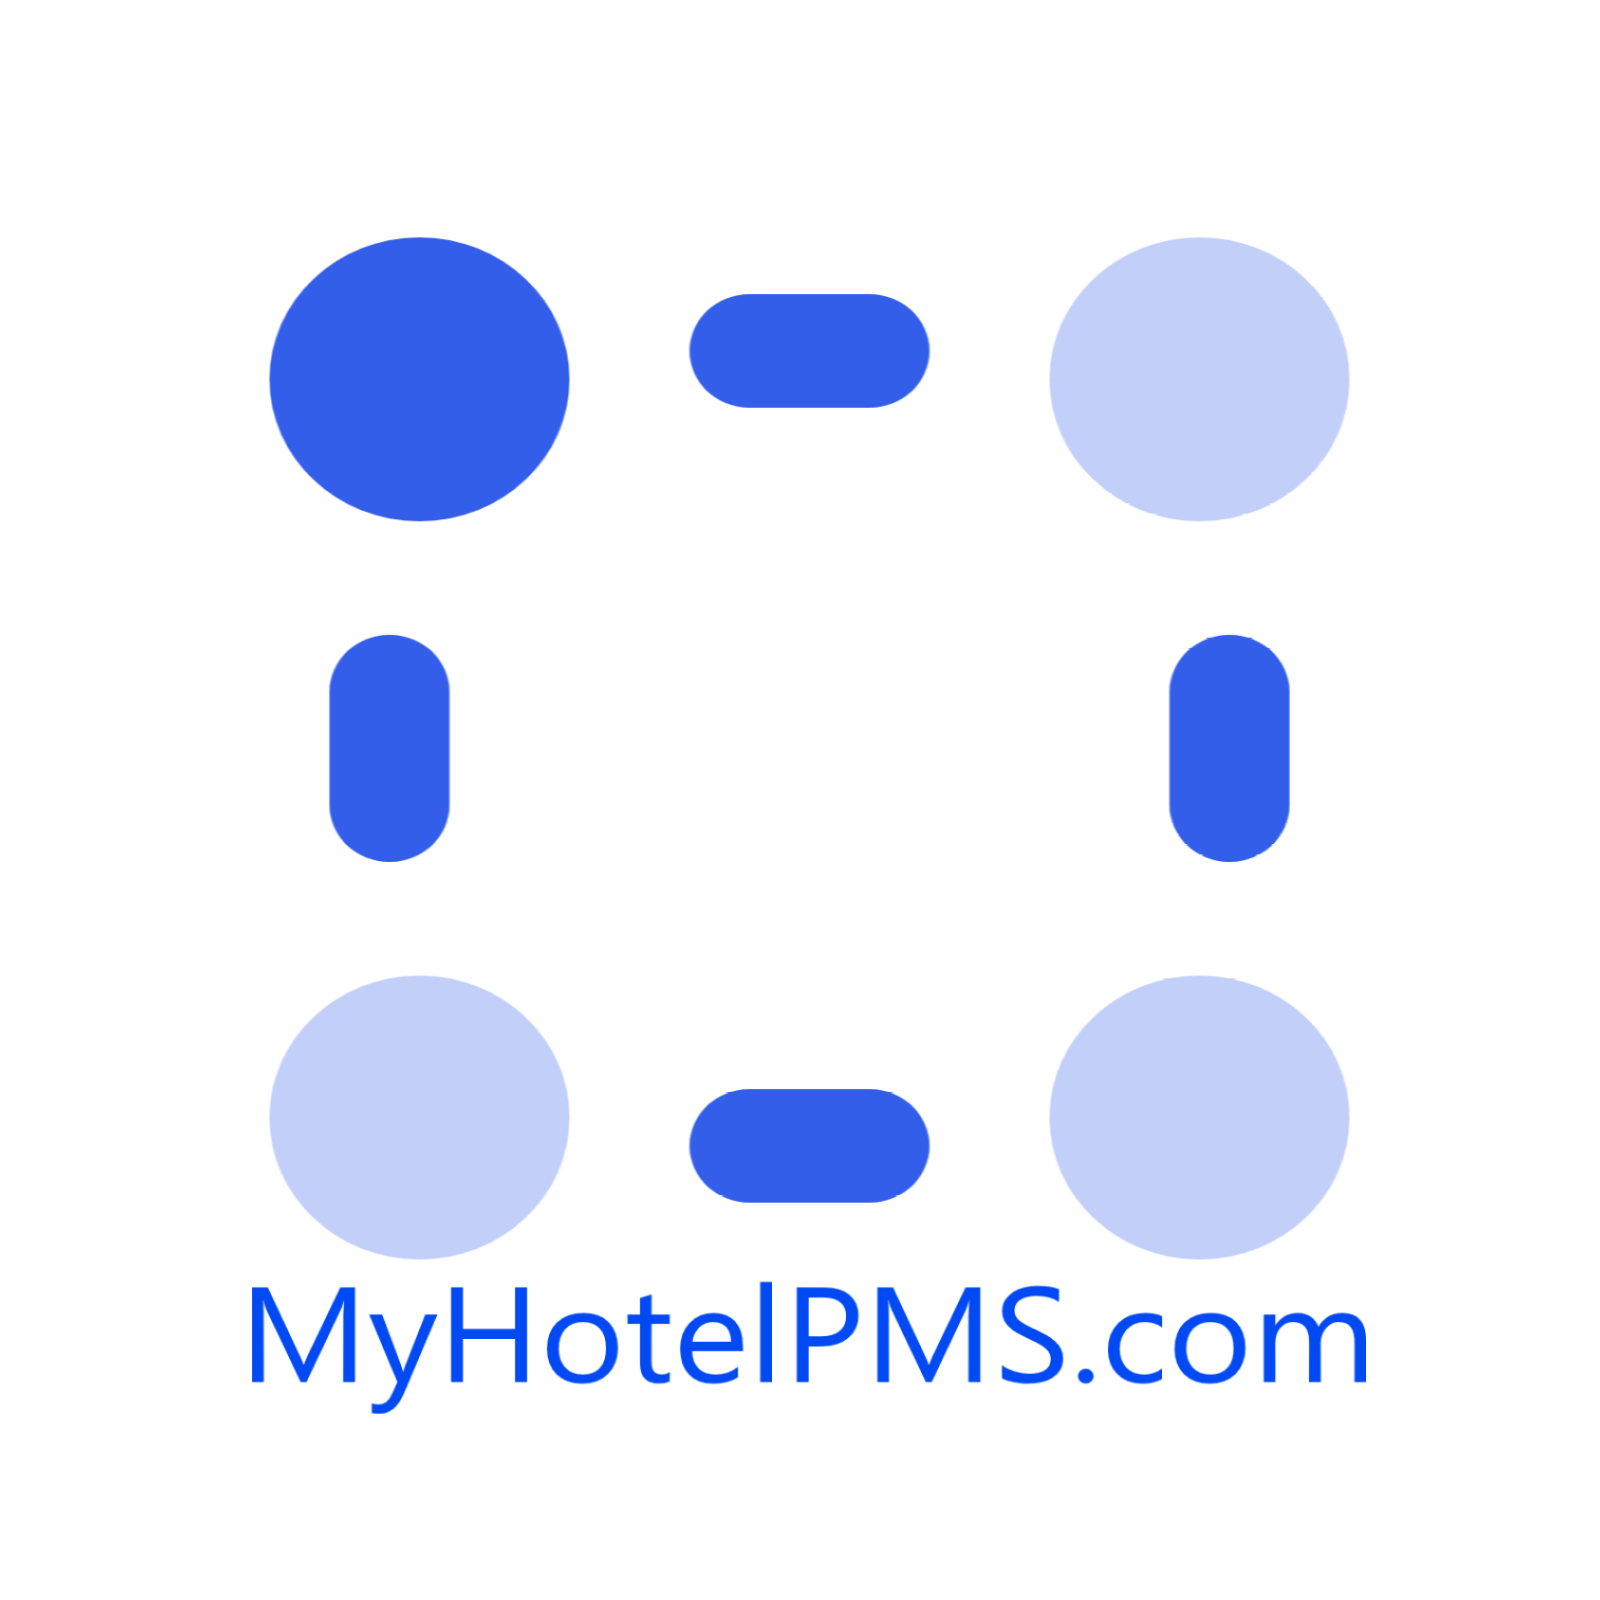 Hotel PMS Software by MyHotelPMS includes Front Desk System + Direct Booking Engine + Channel Manager + Payment Gateway + Housekeeping